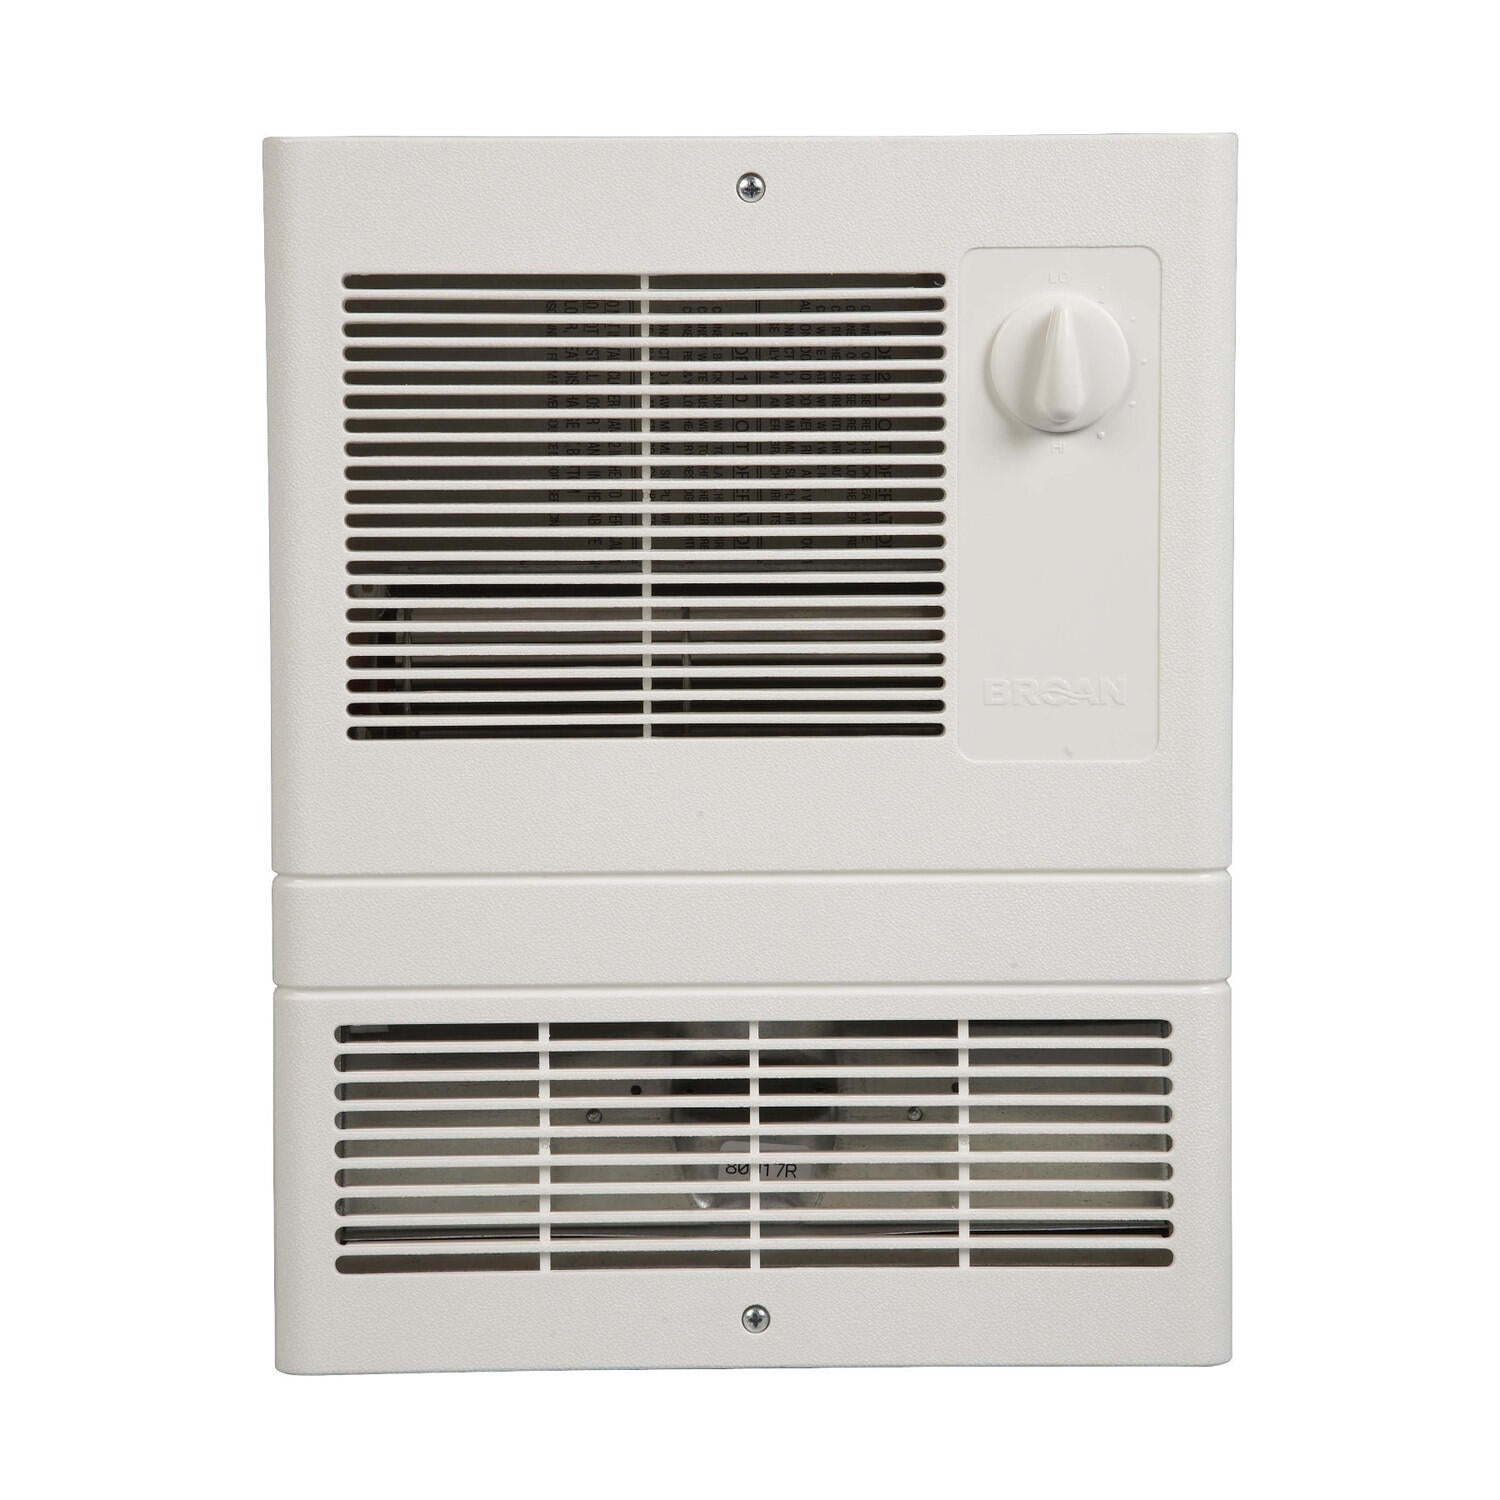 Broan 9815WH Broan® Wall Heater, High-Capacity, 1500W Heater, 120/240V